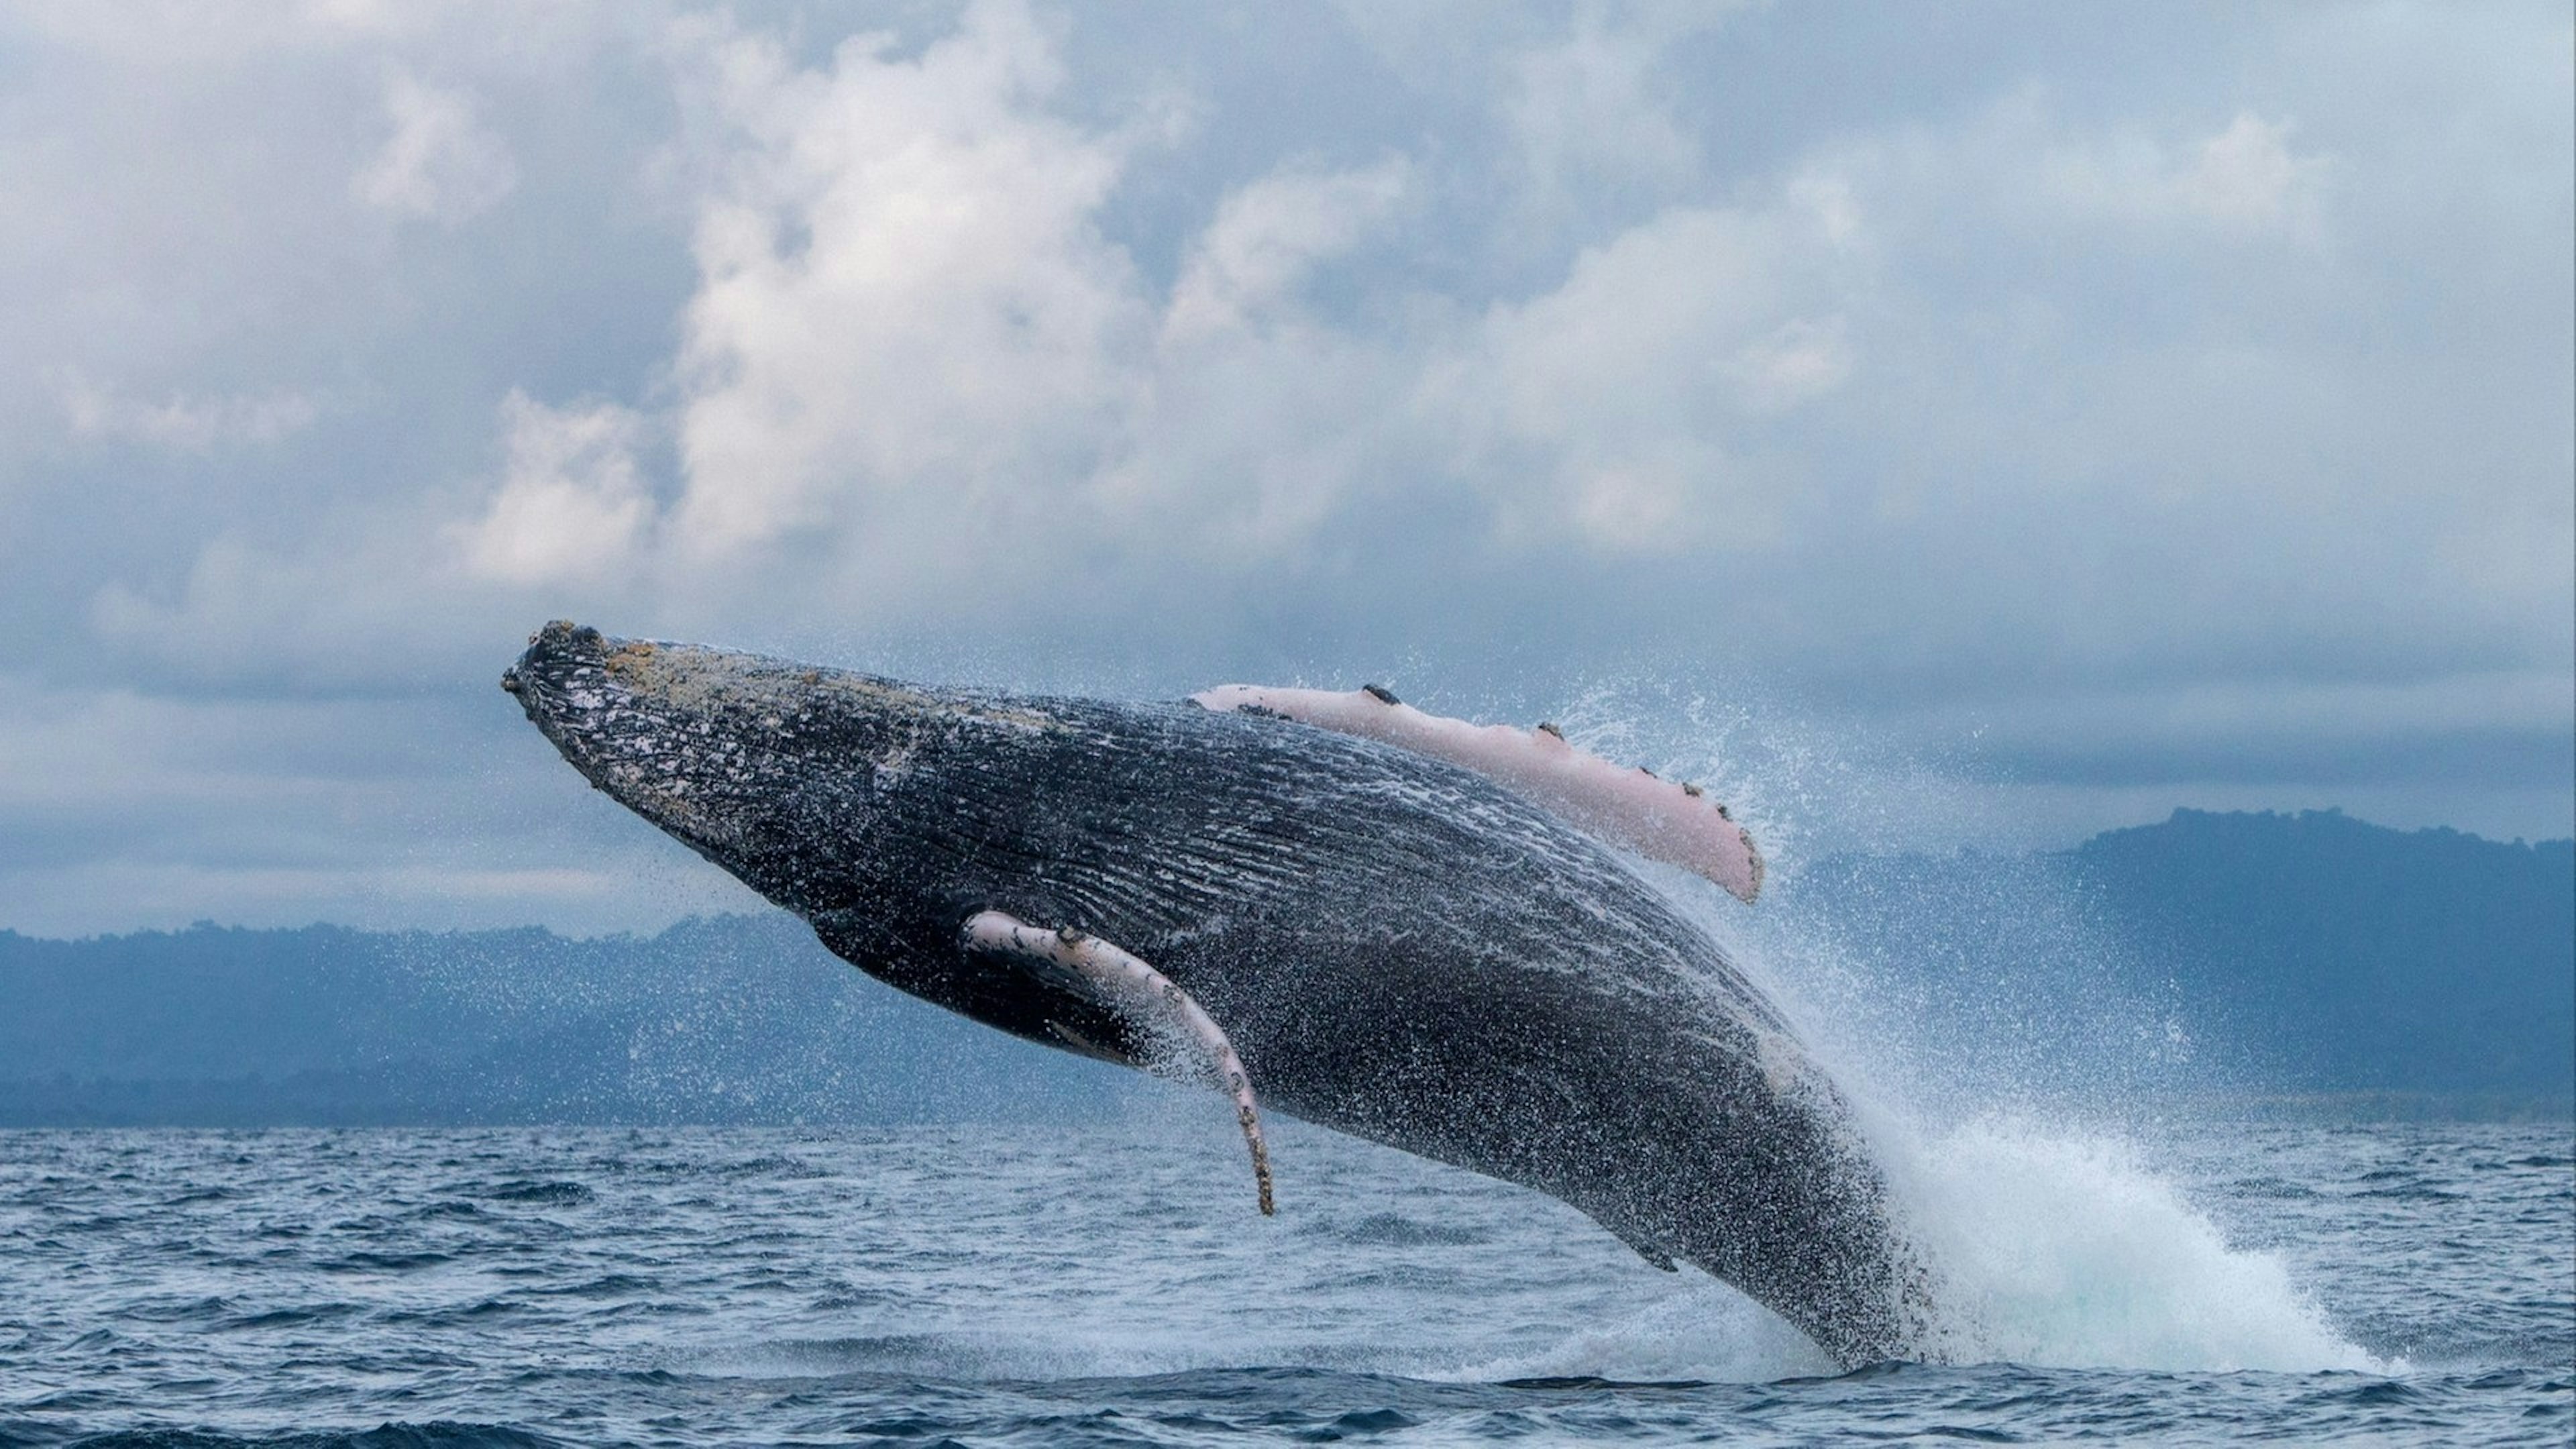 Humpback whale jumping out of the water off the coast of Nuquí in Colombia.